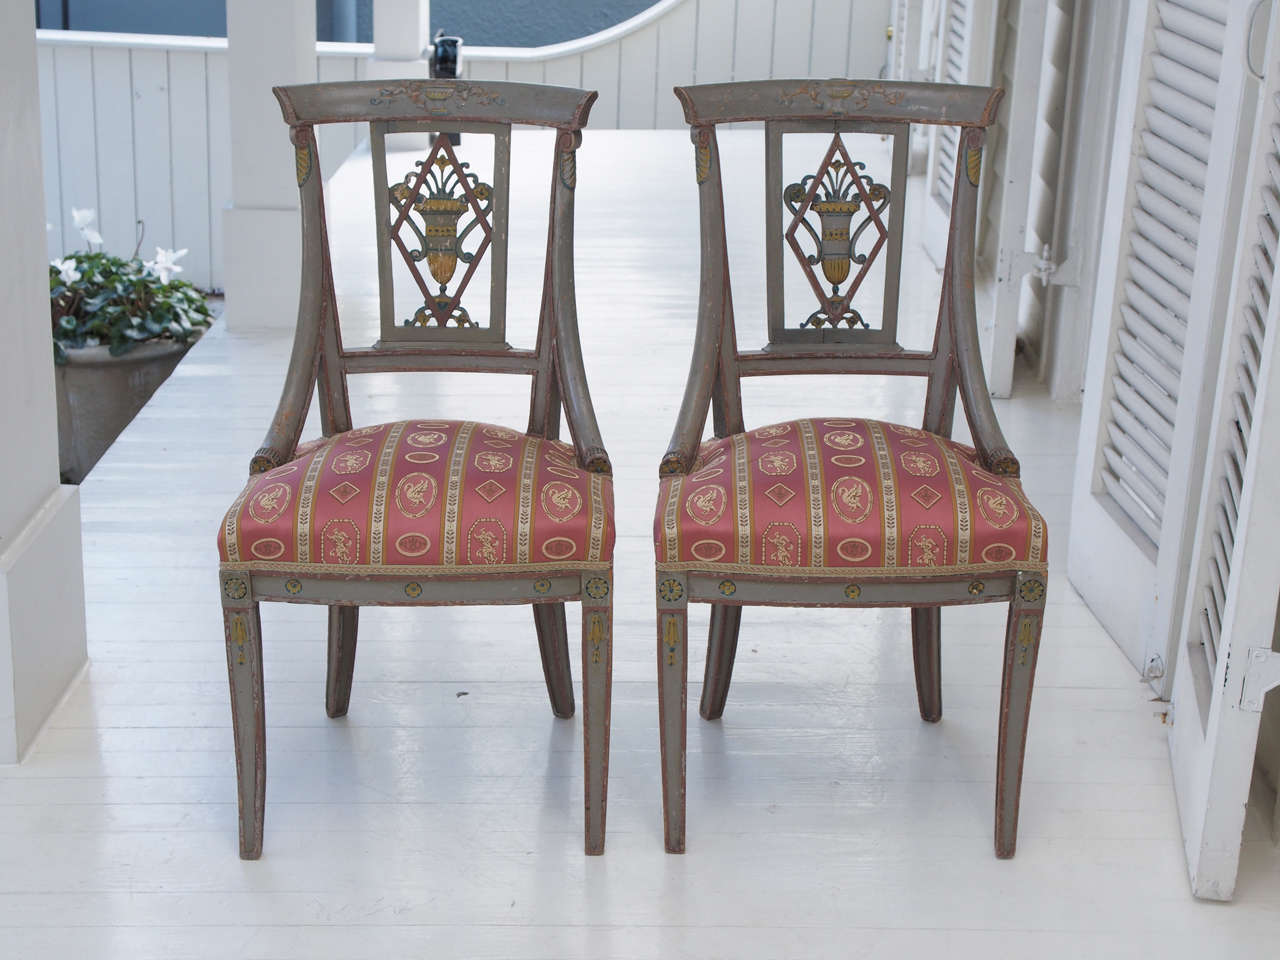 A pair of finely carved and painted Empire seats, the flared, en gondole backs with a lozenge framing an urn, the saber legs molded and topped with rosettes. Very sturdy and newly upholstered in a Brunschwig & Fils Empire style fabric.